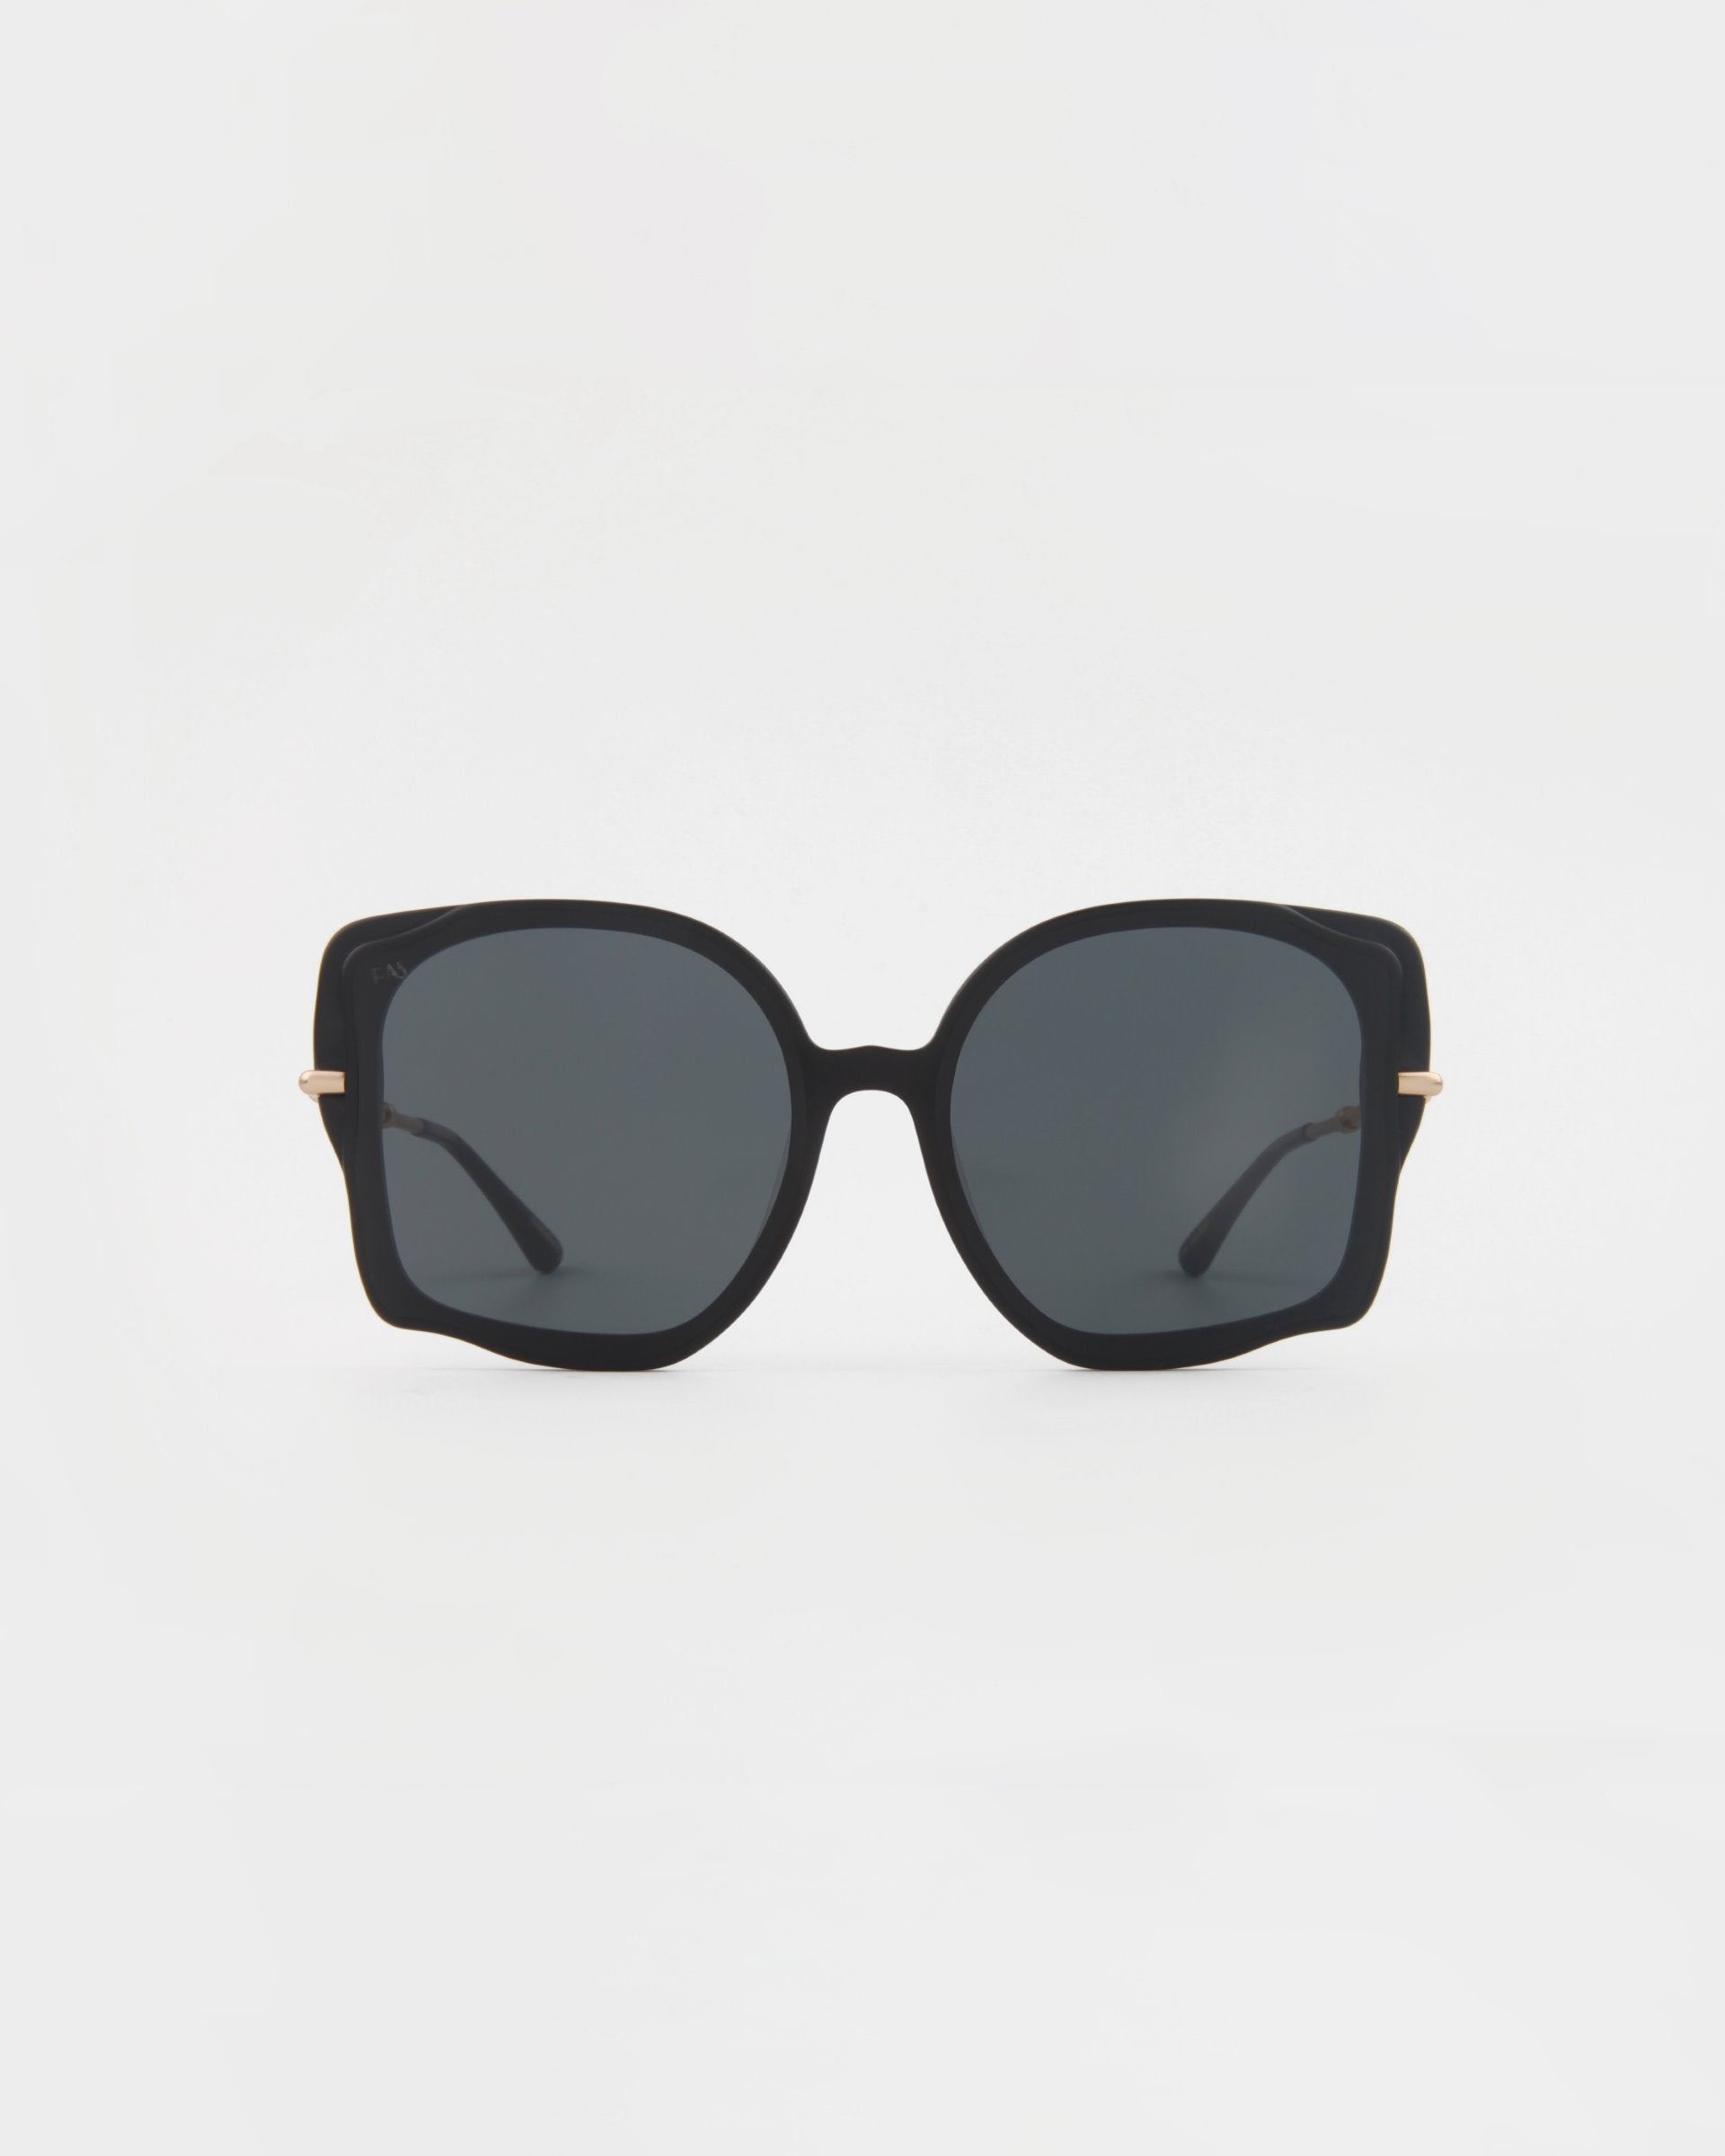 The Fahrenheit by For Art&#39;s Sake®: A pair of oversized square sunglasses with black frames and dark tinted lenses. These handmade acetate sunglasses feature thin 18-karat gold-plated accents on the outer sides of each lens, connecting to slender black arms. The background is plain white.